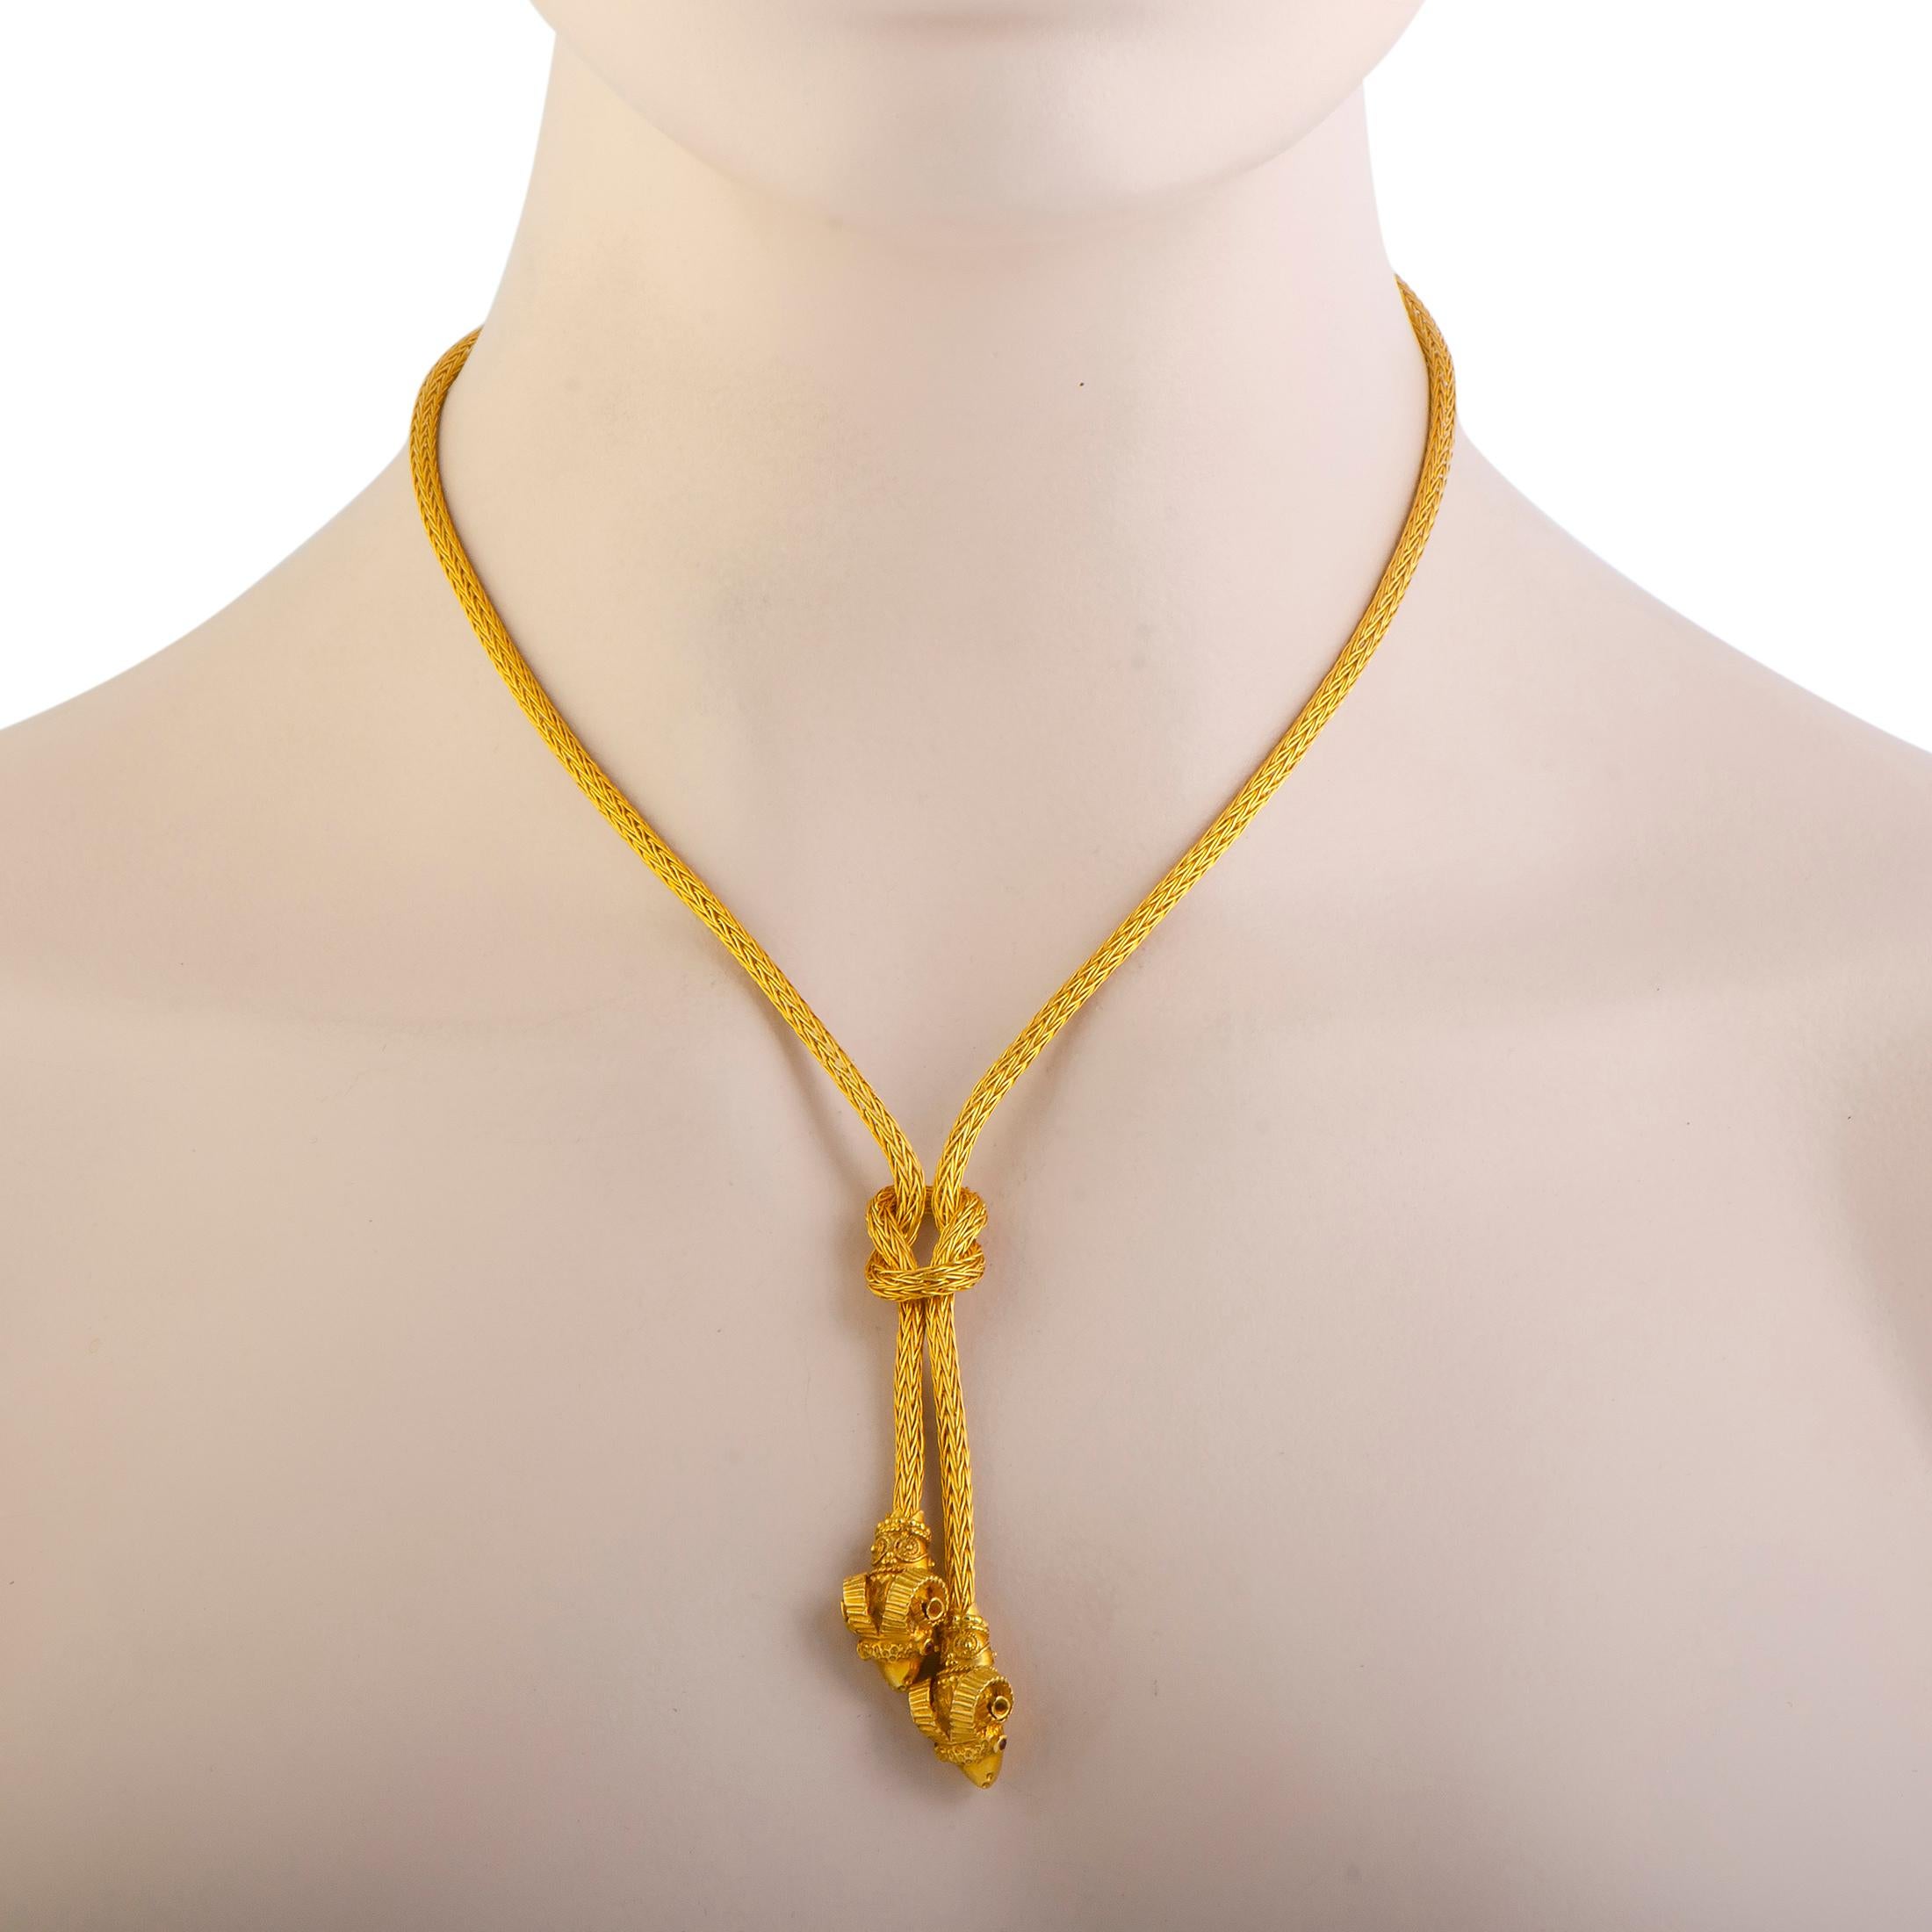 This utterly stunning Hercules knot necklace by Lalaounis is uniquely crafted in the beautiful shimmer of 18K yellow gold. The spectacular design includes double ram heads and is adorned with gorgeous rubies that give the necklace an extravagantly